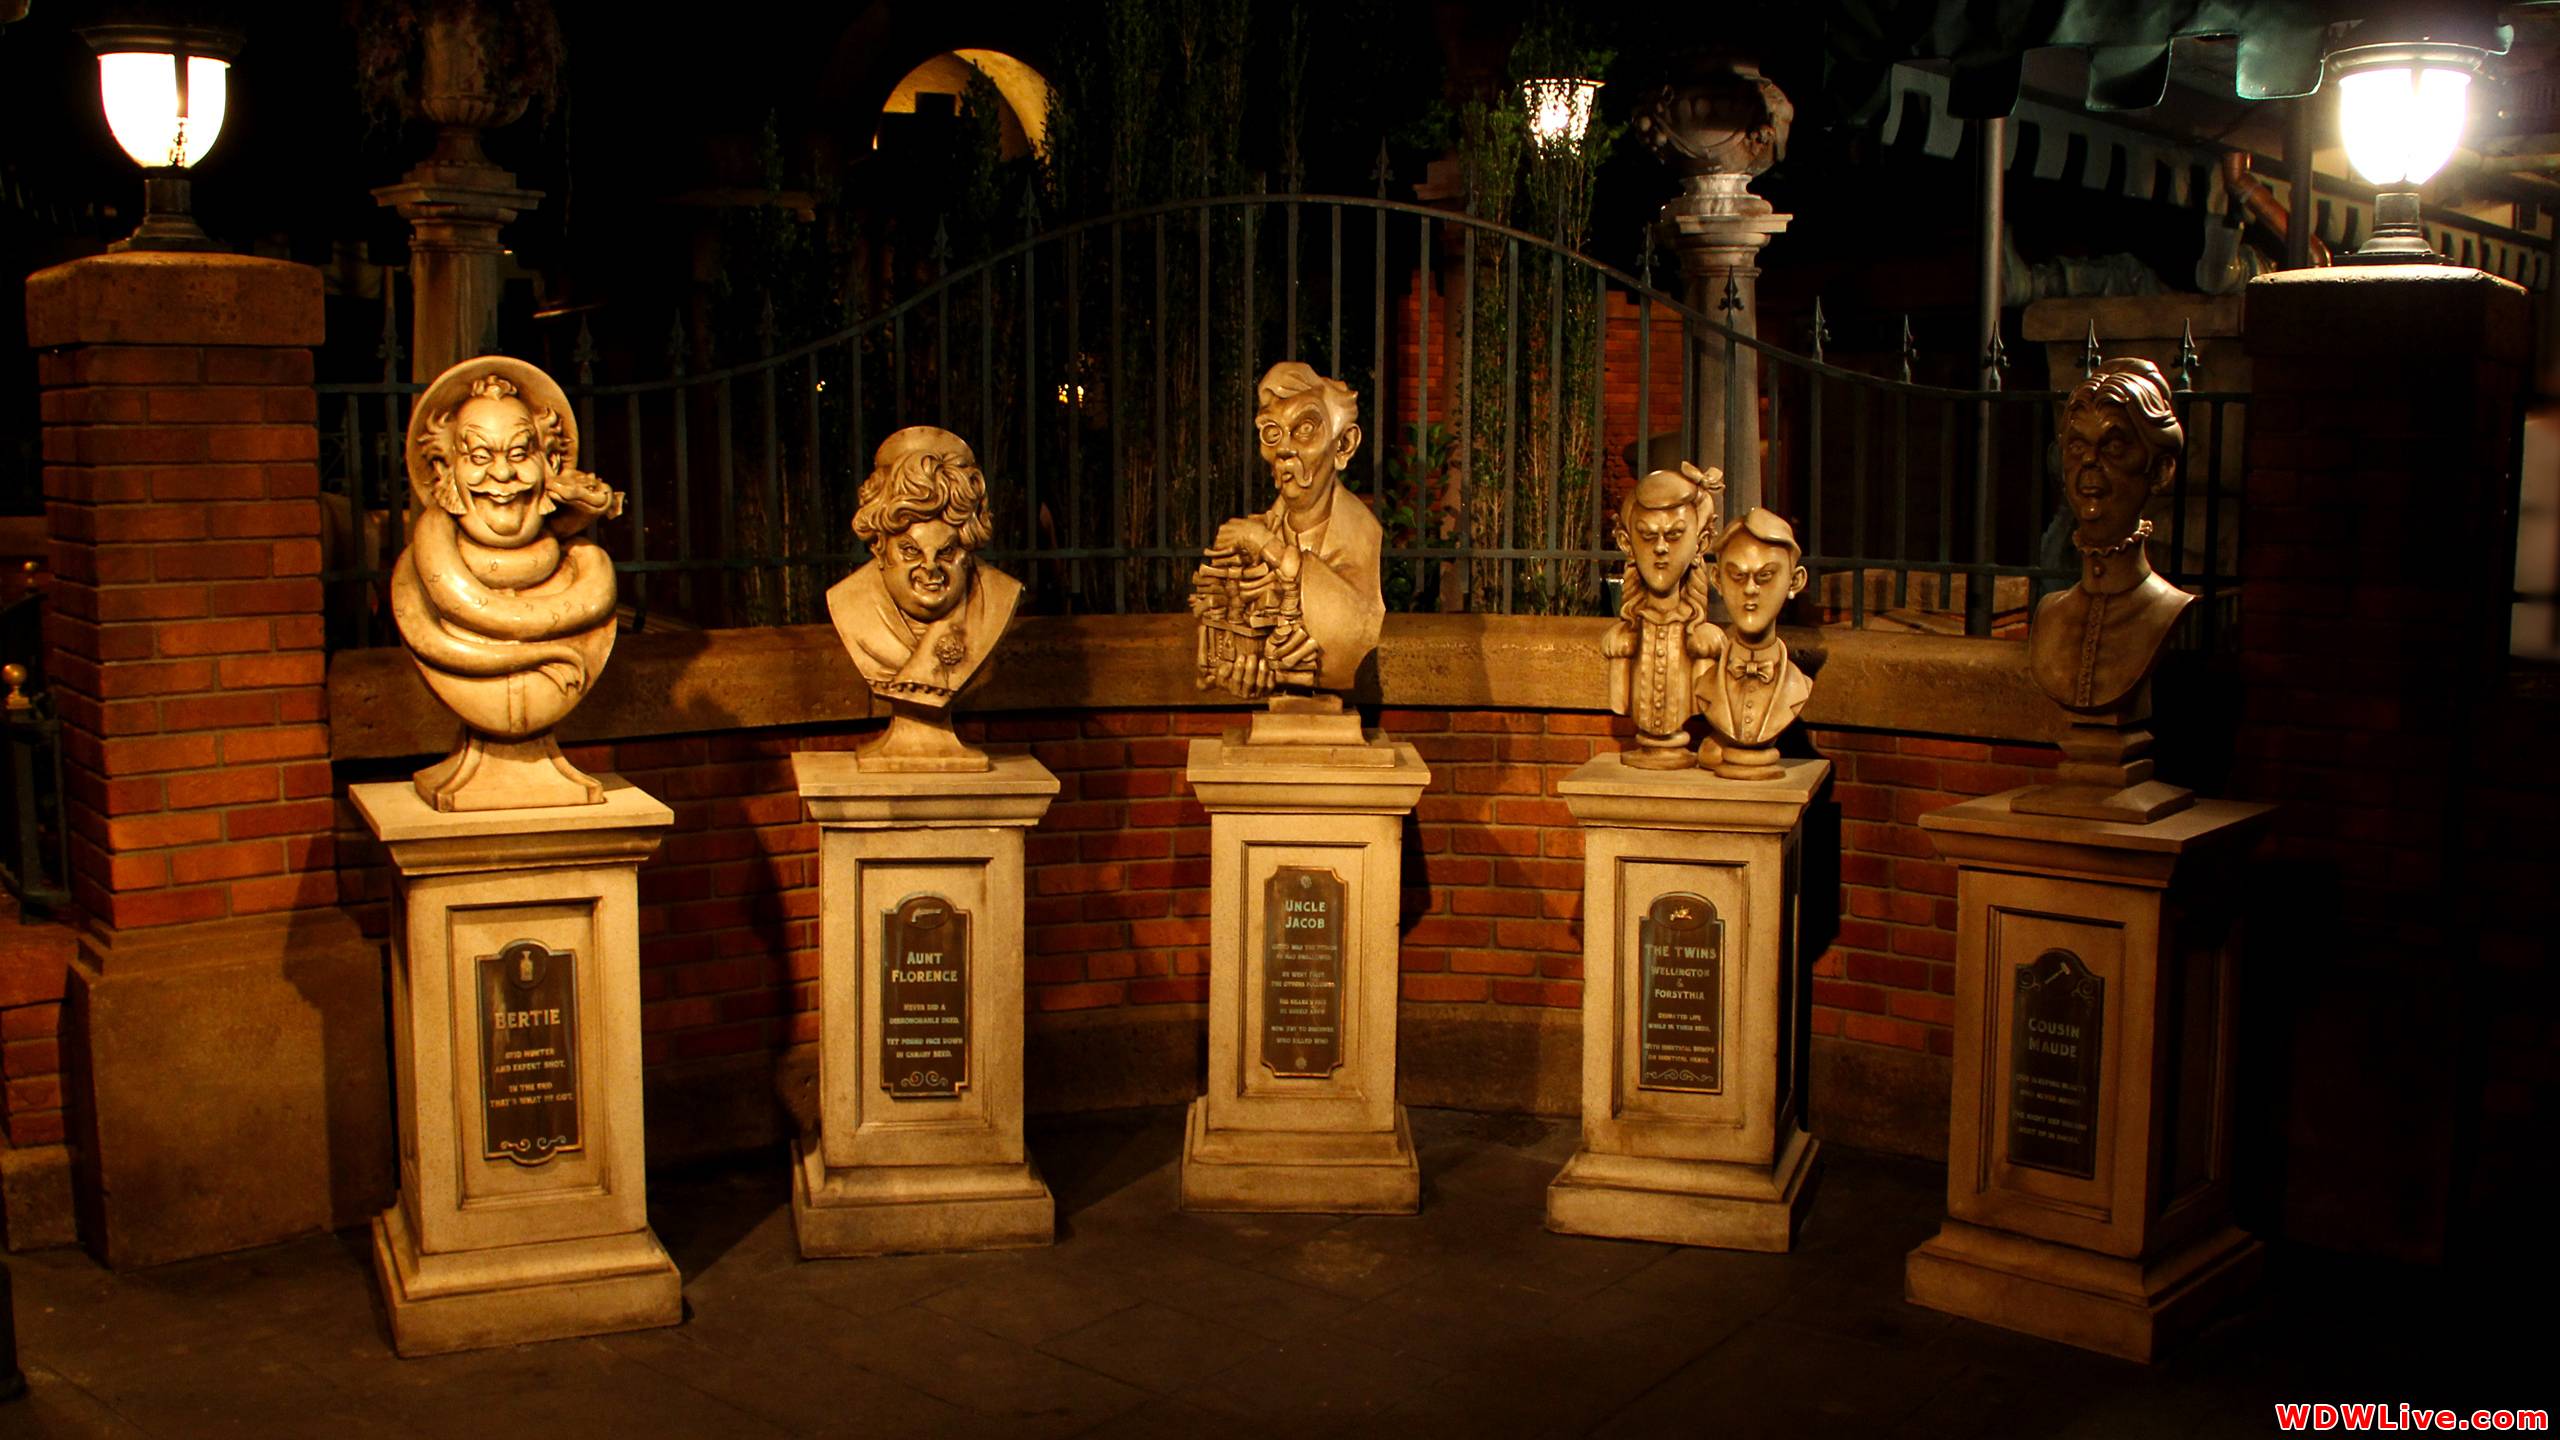 The Haunted Mansion: Part of the new outdoor queue